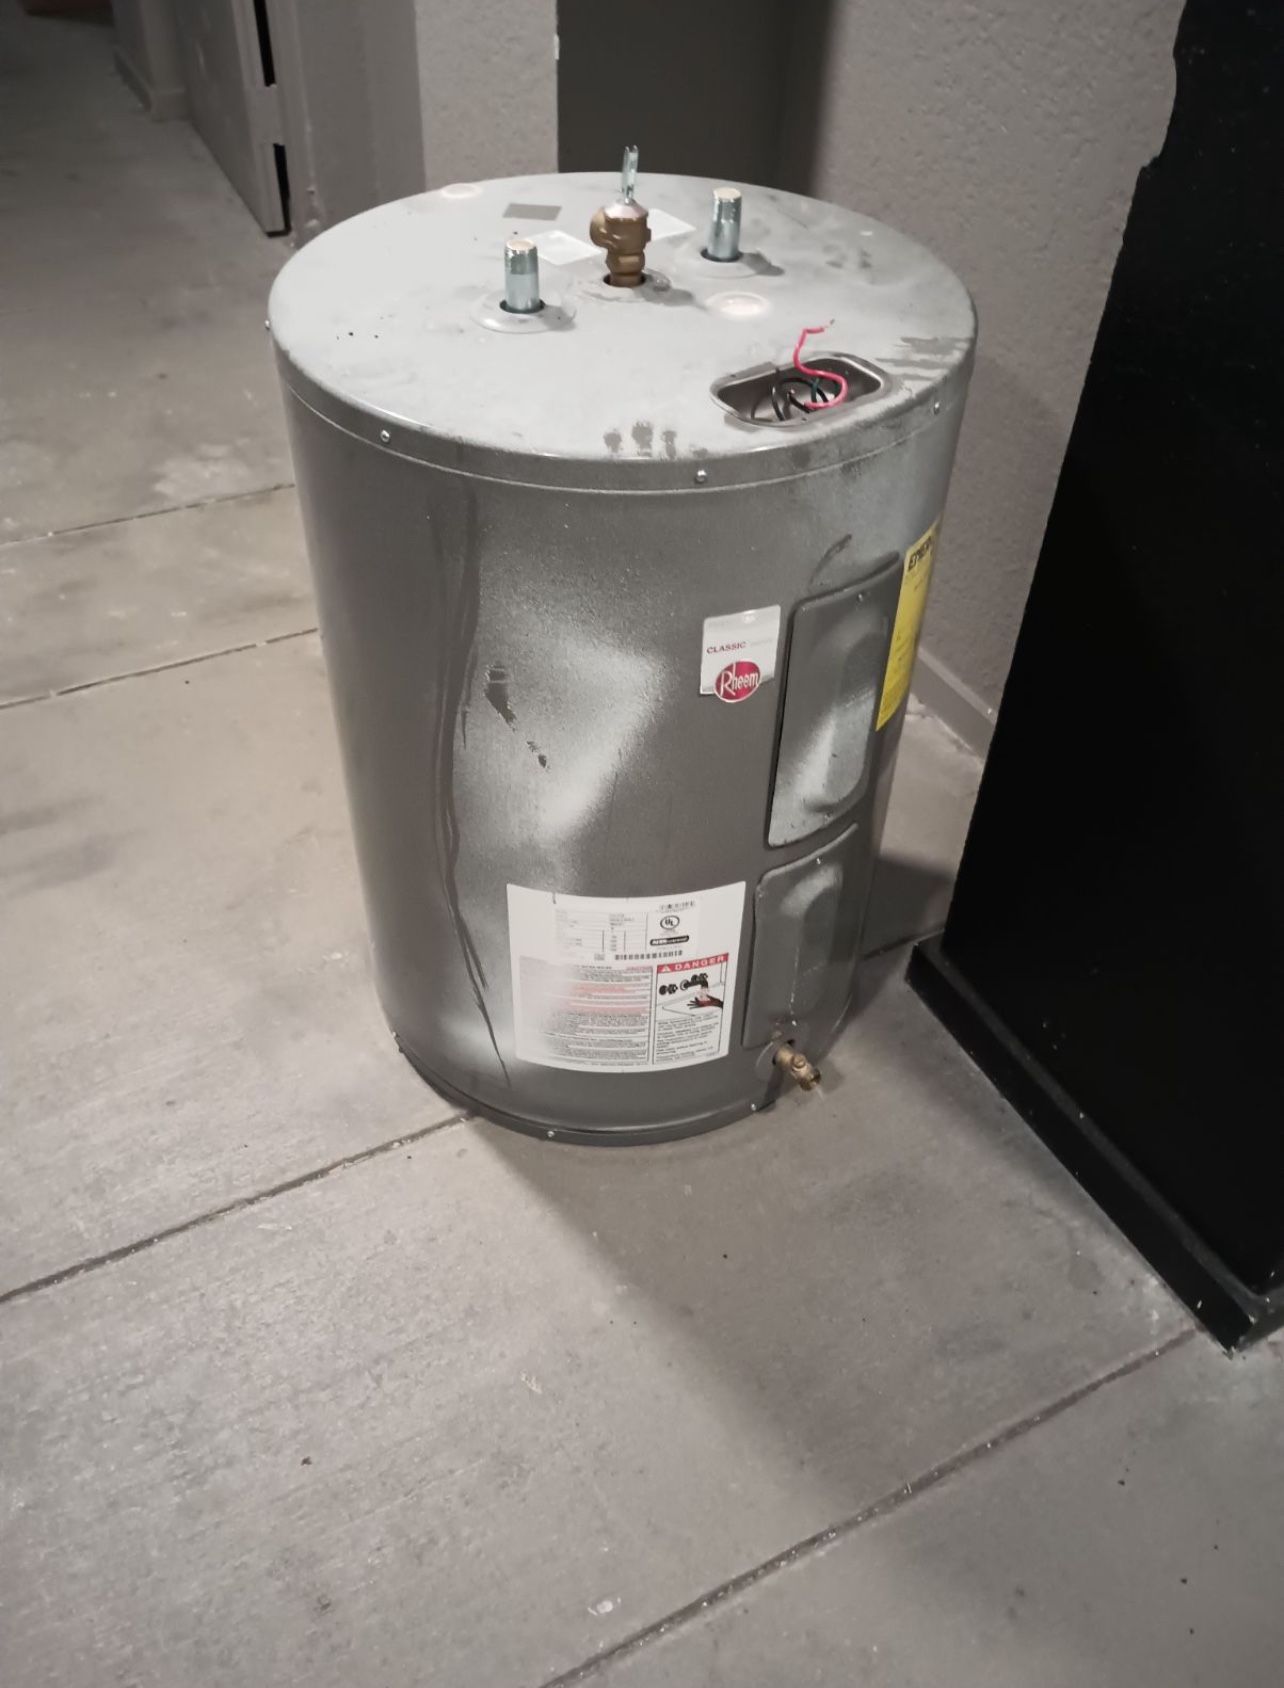 *FREE* Electric Water heater *SEND BEST OFFERS*